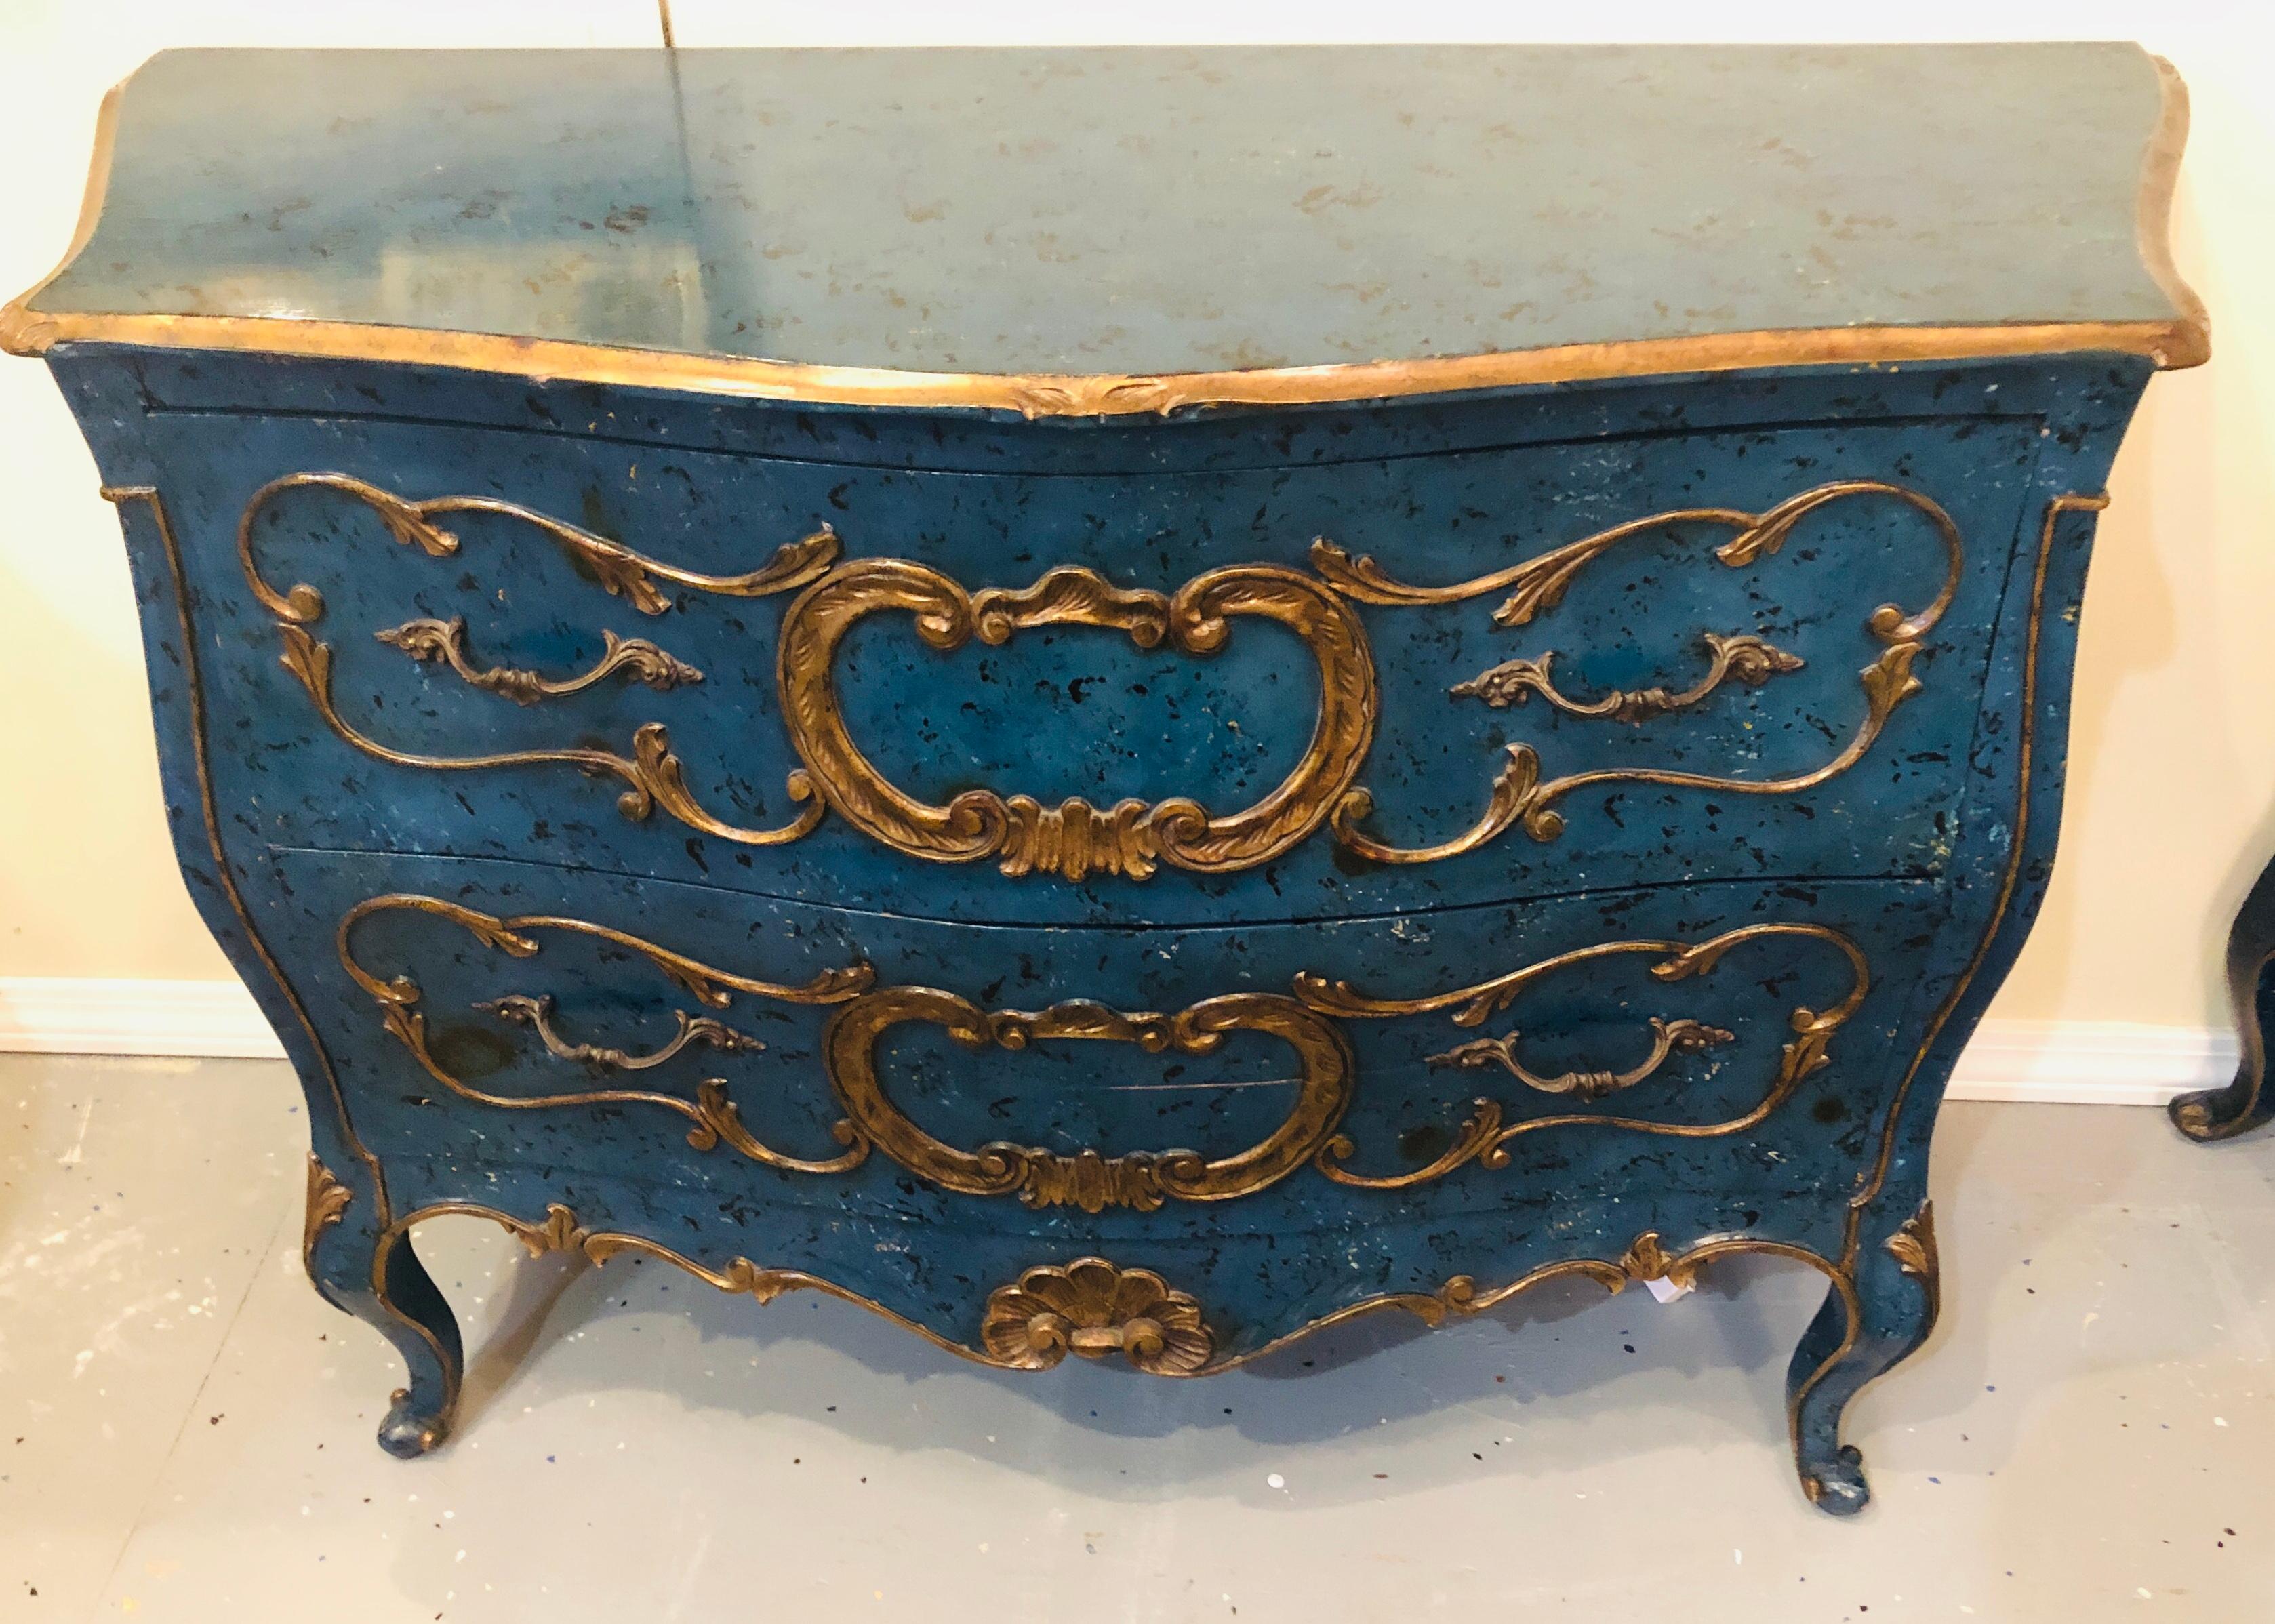 Pair of Royal blue and parcel-gilt decorated bombay commodes, nightstands or chests. These fine hand painted dramatic commodes or chests are simply stunning done in the Bombay Louis XV style this pair of Hollywood Regency commodes have wonderfully